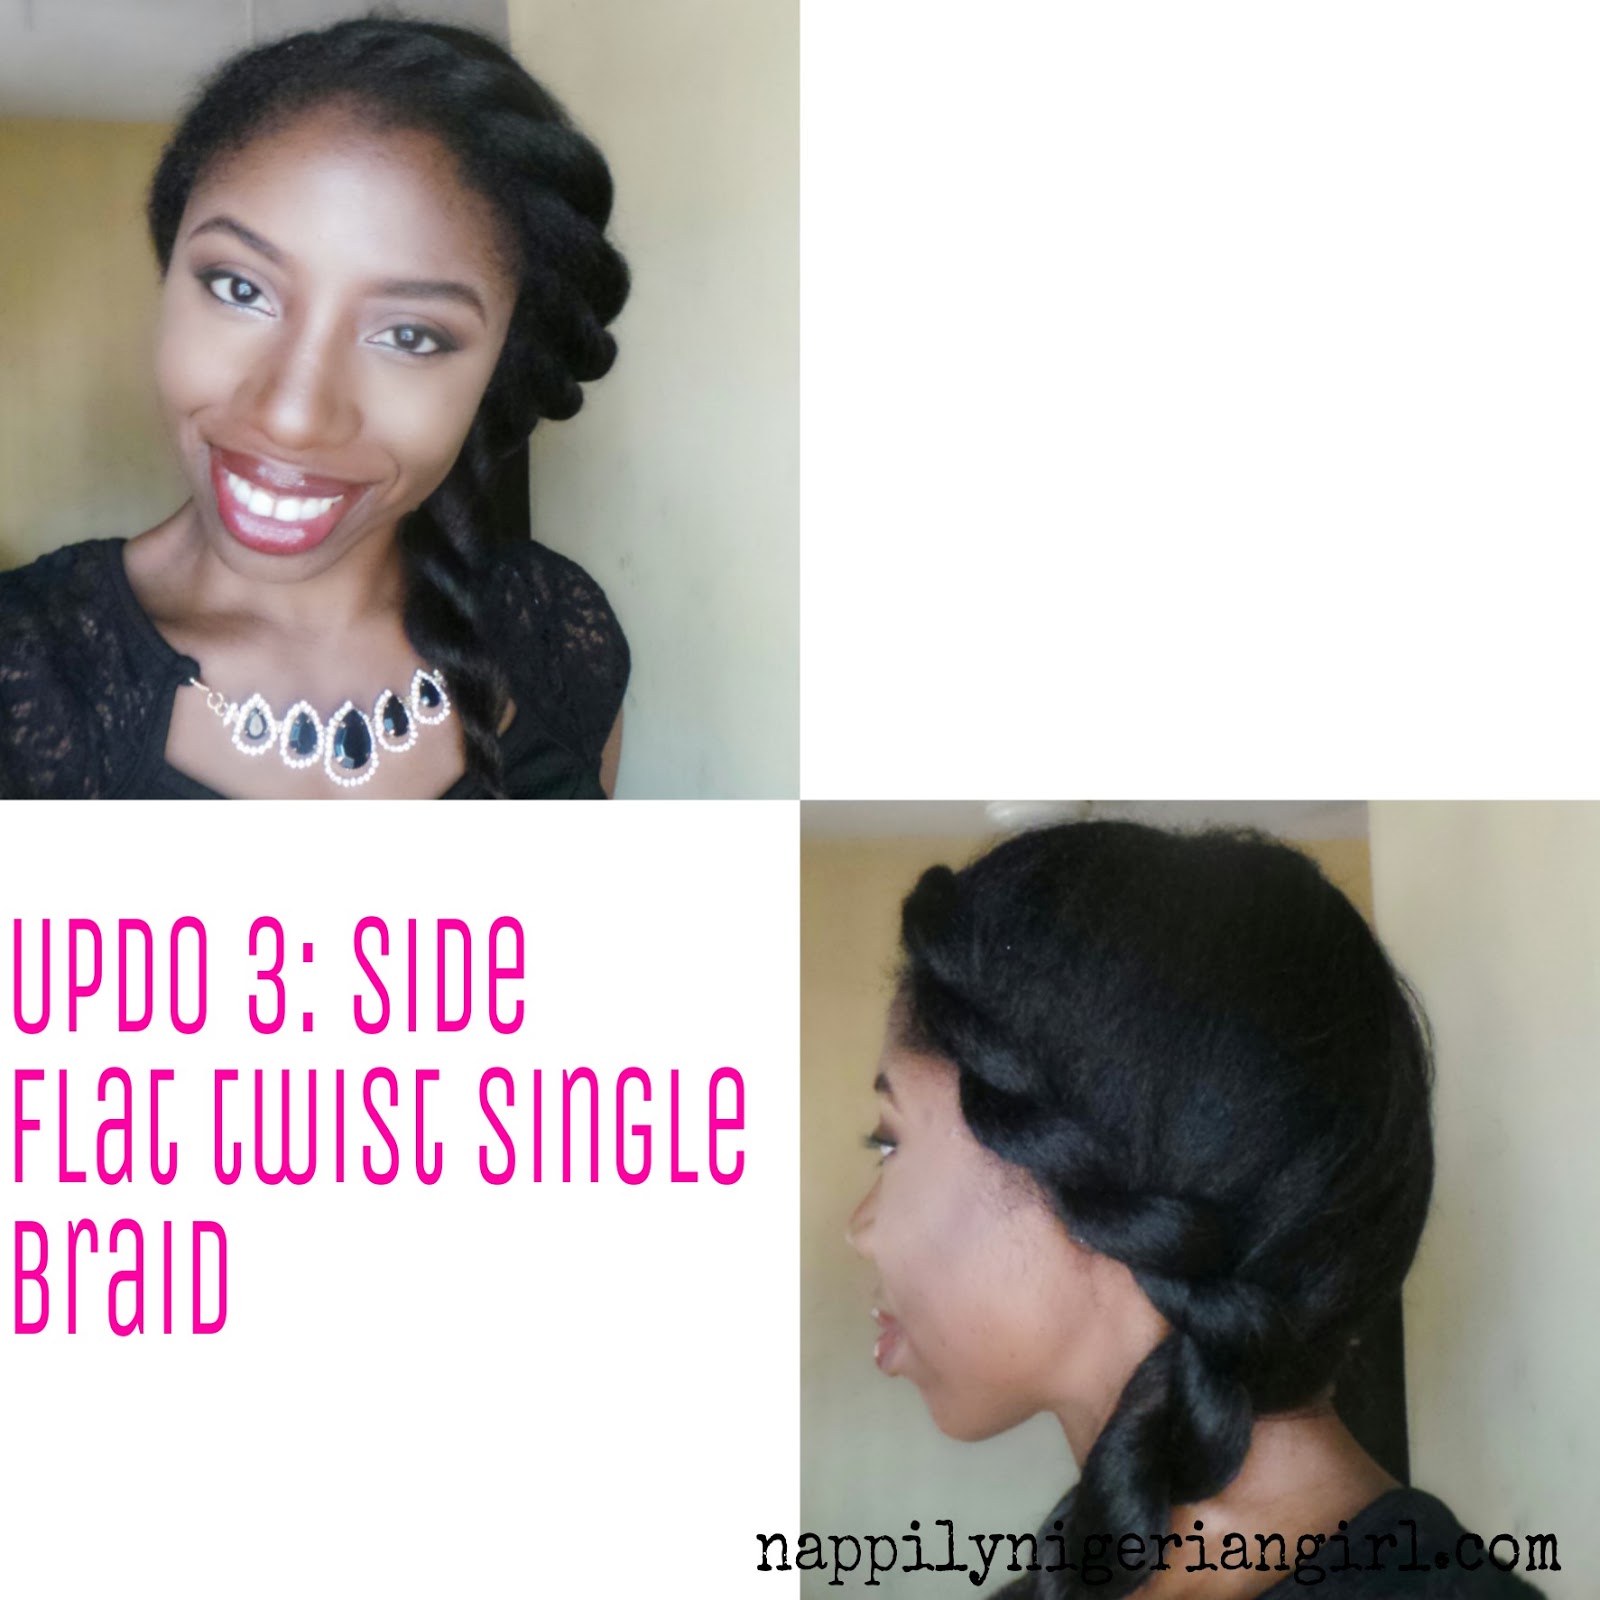 PROTECTIVE STYLES FOR STRAIGHTENED NATURAL HAIR - nappilynigeriangirl